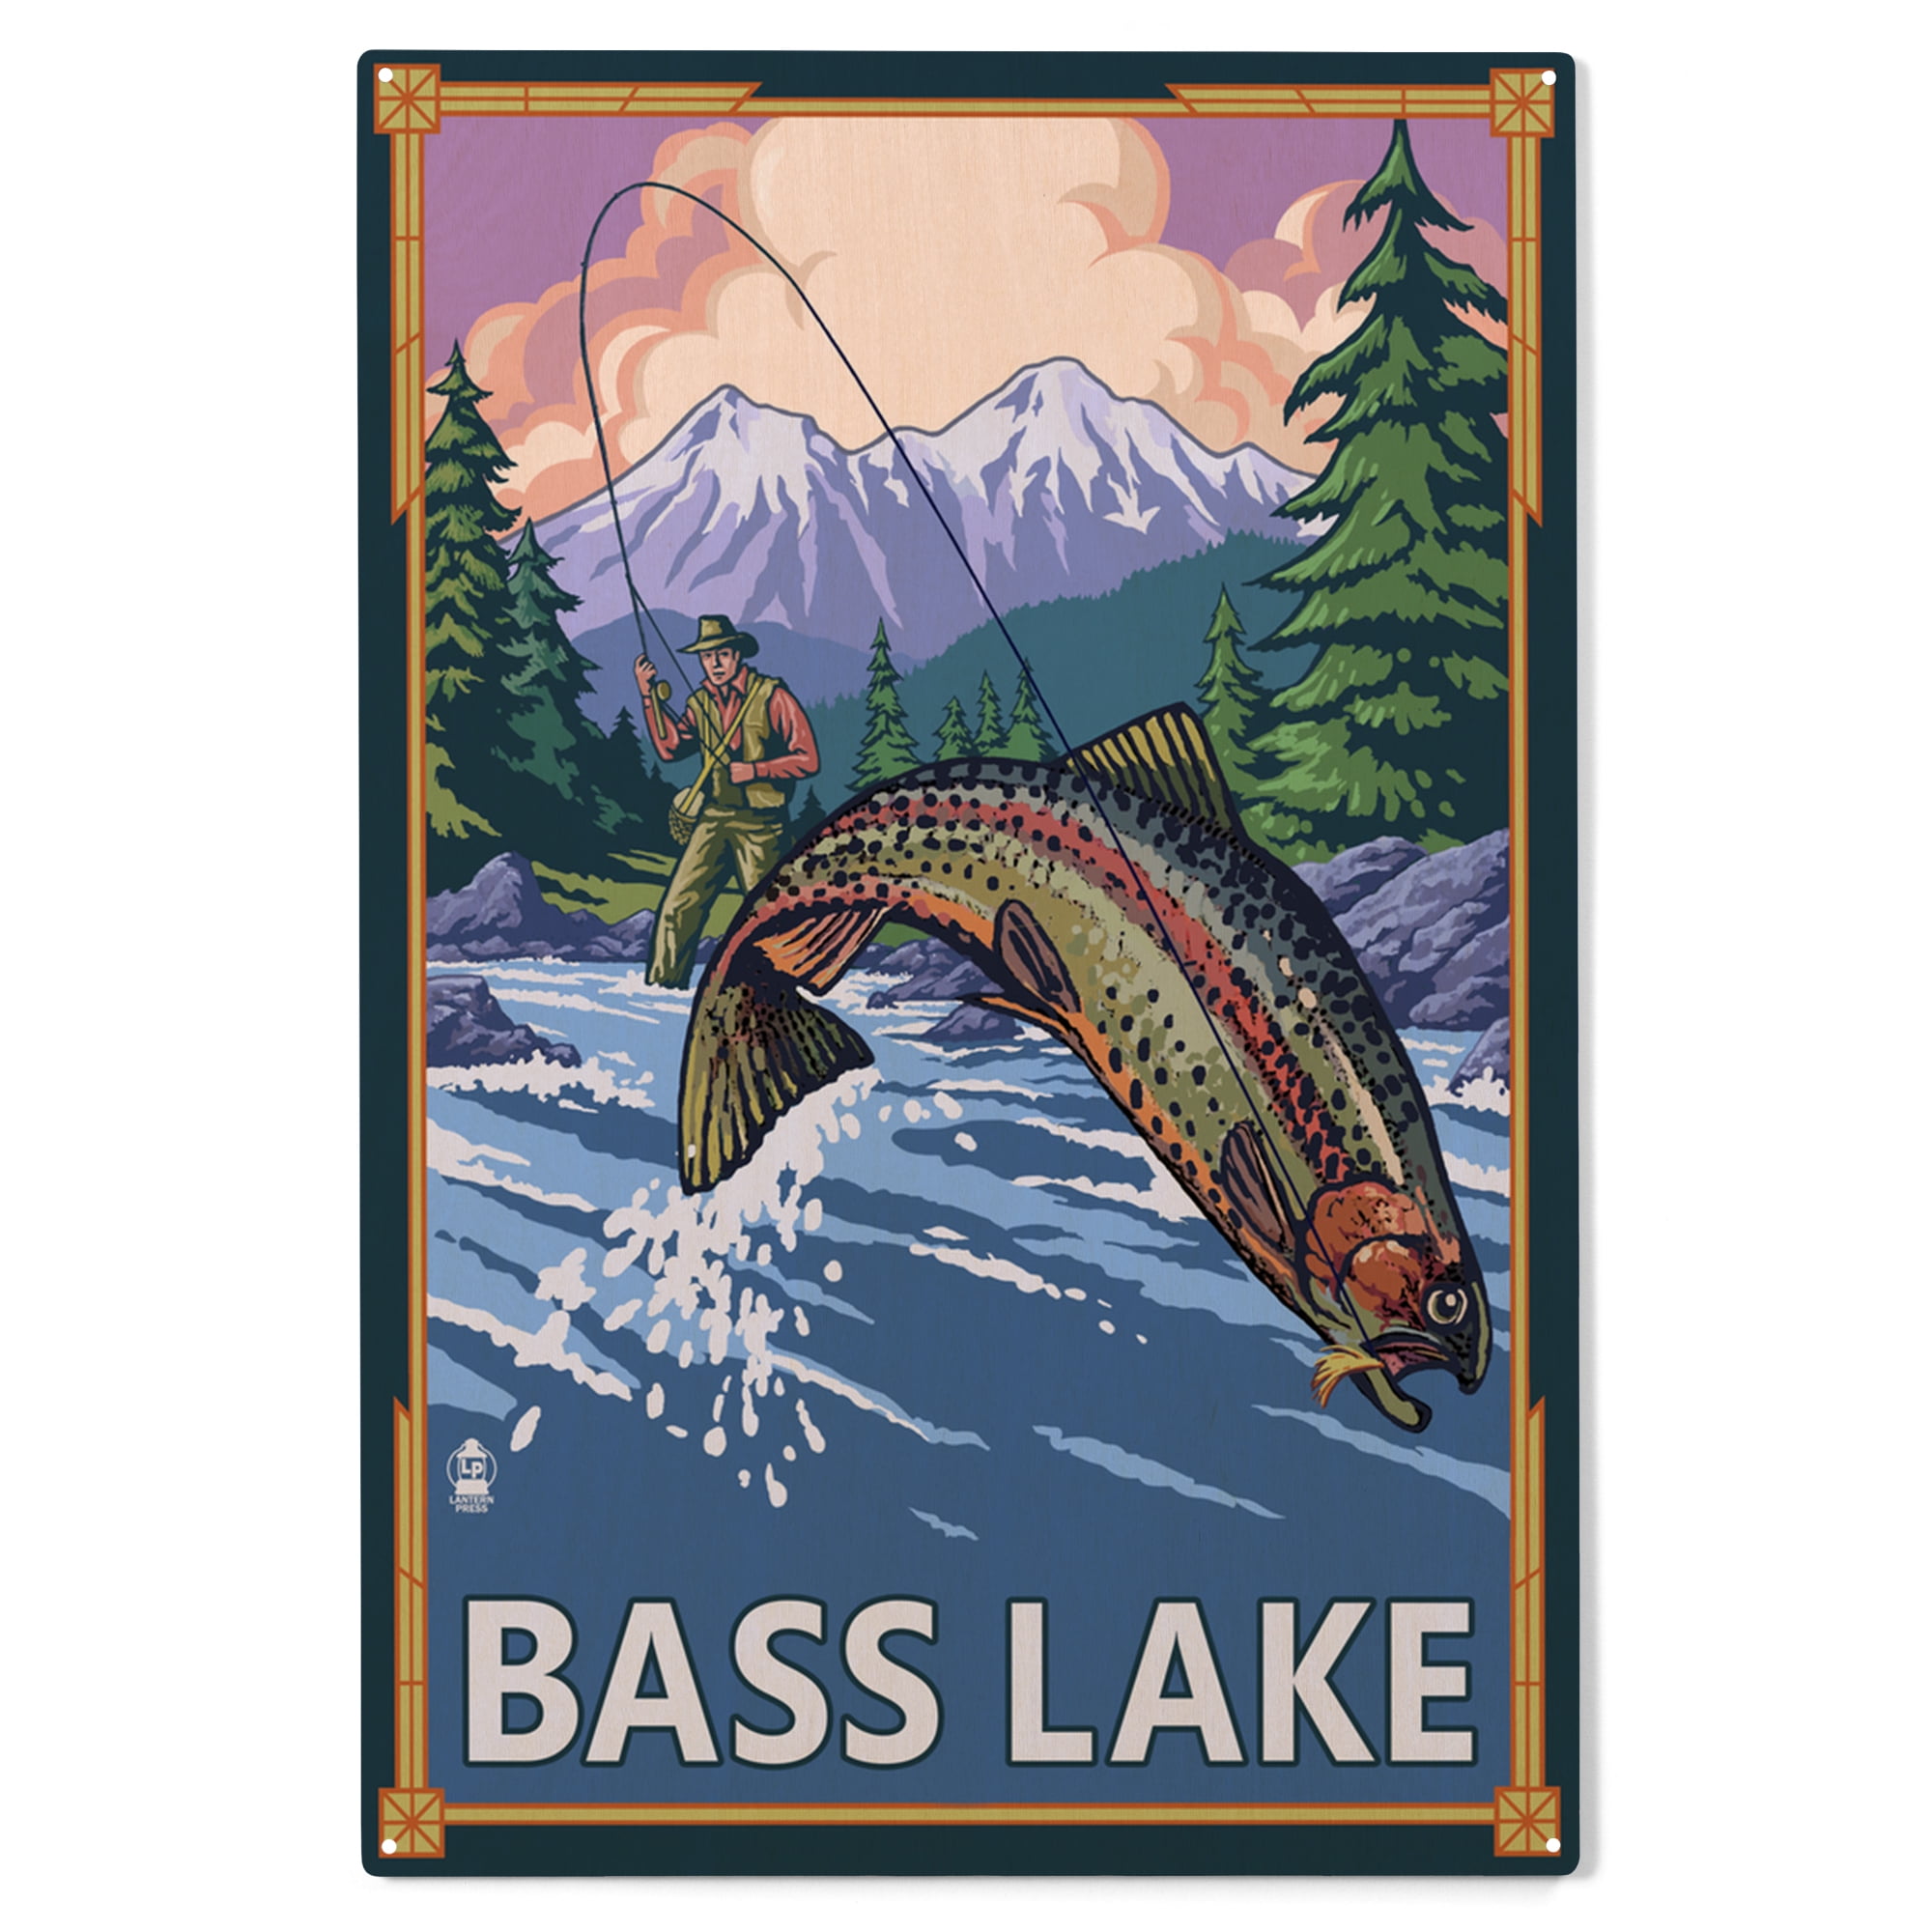 Bass Lake, California, Angler Fly Fishing Scene (Leaping Trout) Birch Wood  Wall Sign (12x18 Rustic Home Decor, Ready to Hang Art) 